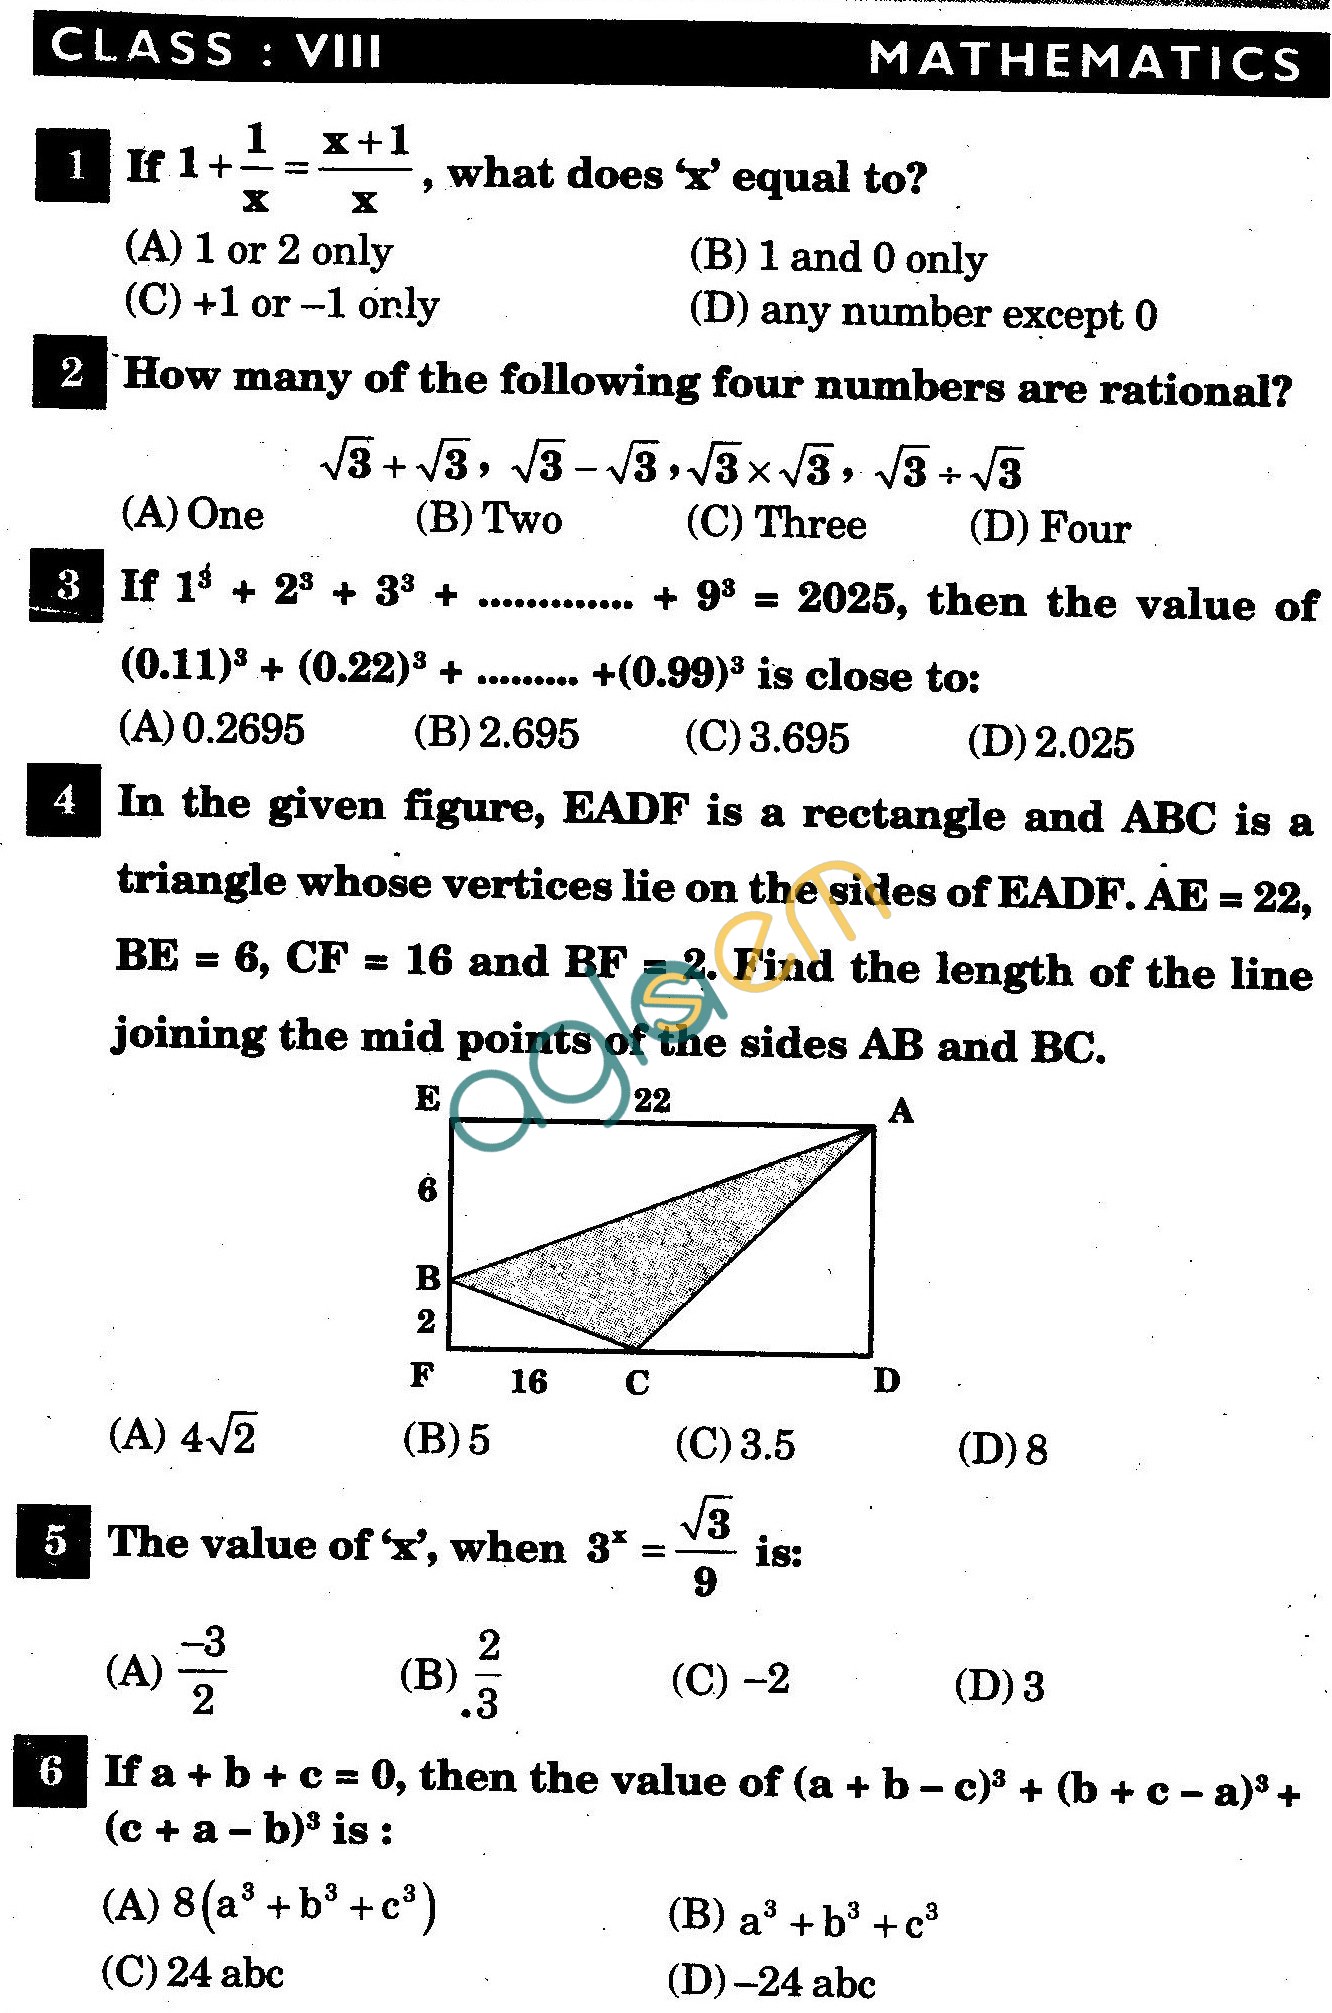 NSTSE 2011 Class VIII Question Paper with Answers - Mathematics